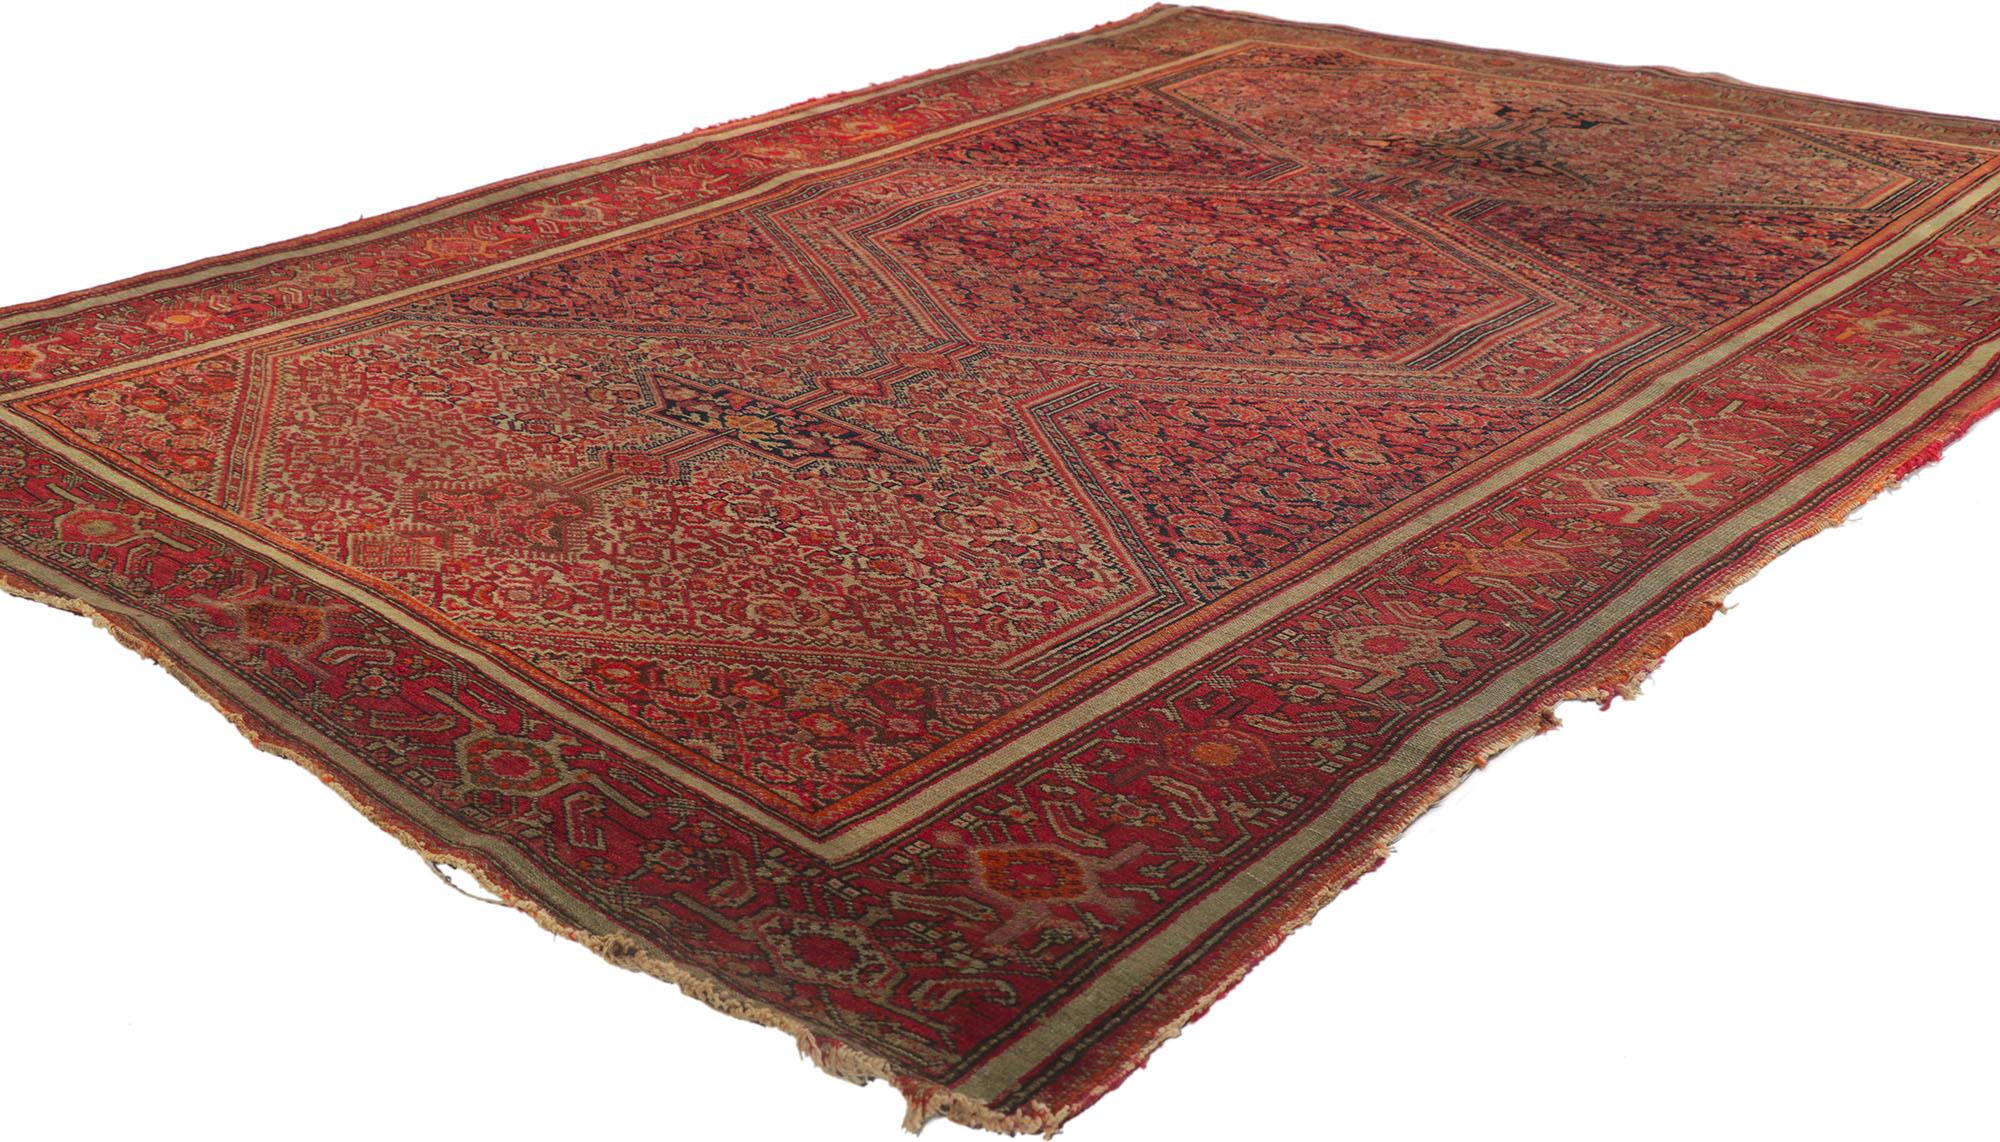 73287 Distressed Antique-Worn Persian Malayer Rug, 04’07 x 06’07. Originating from the western Iranian region of Malayer, Persian Malayer rugs are renowned for their meticulous craftsmanship and intricate artistry. They feature elaborate designs